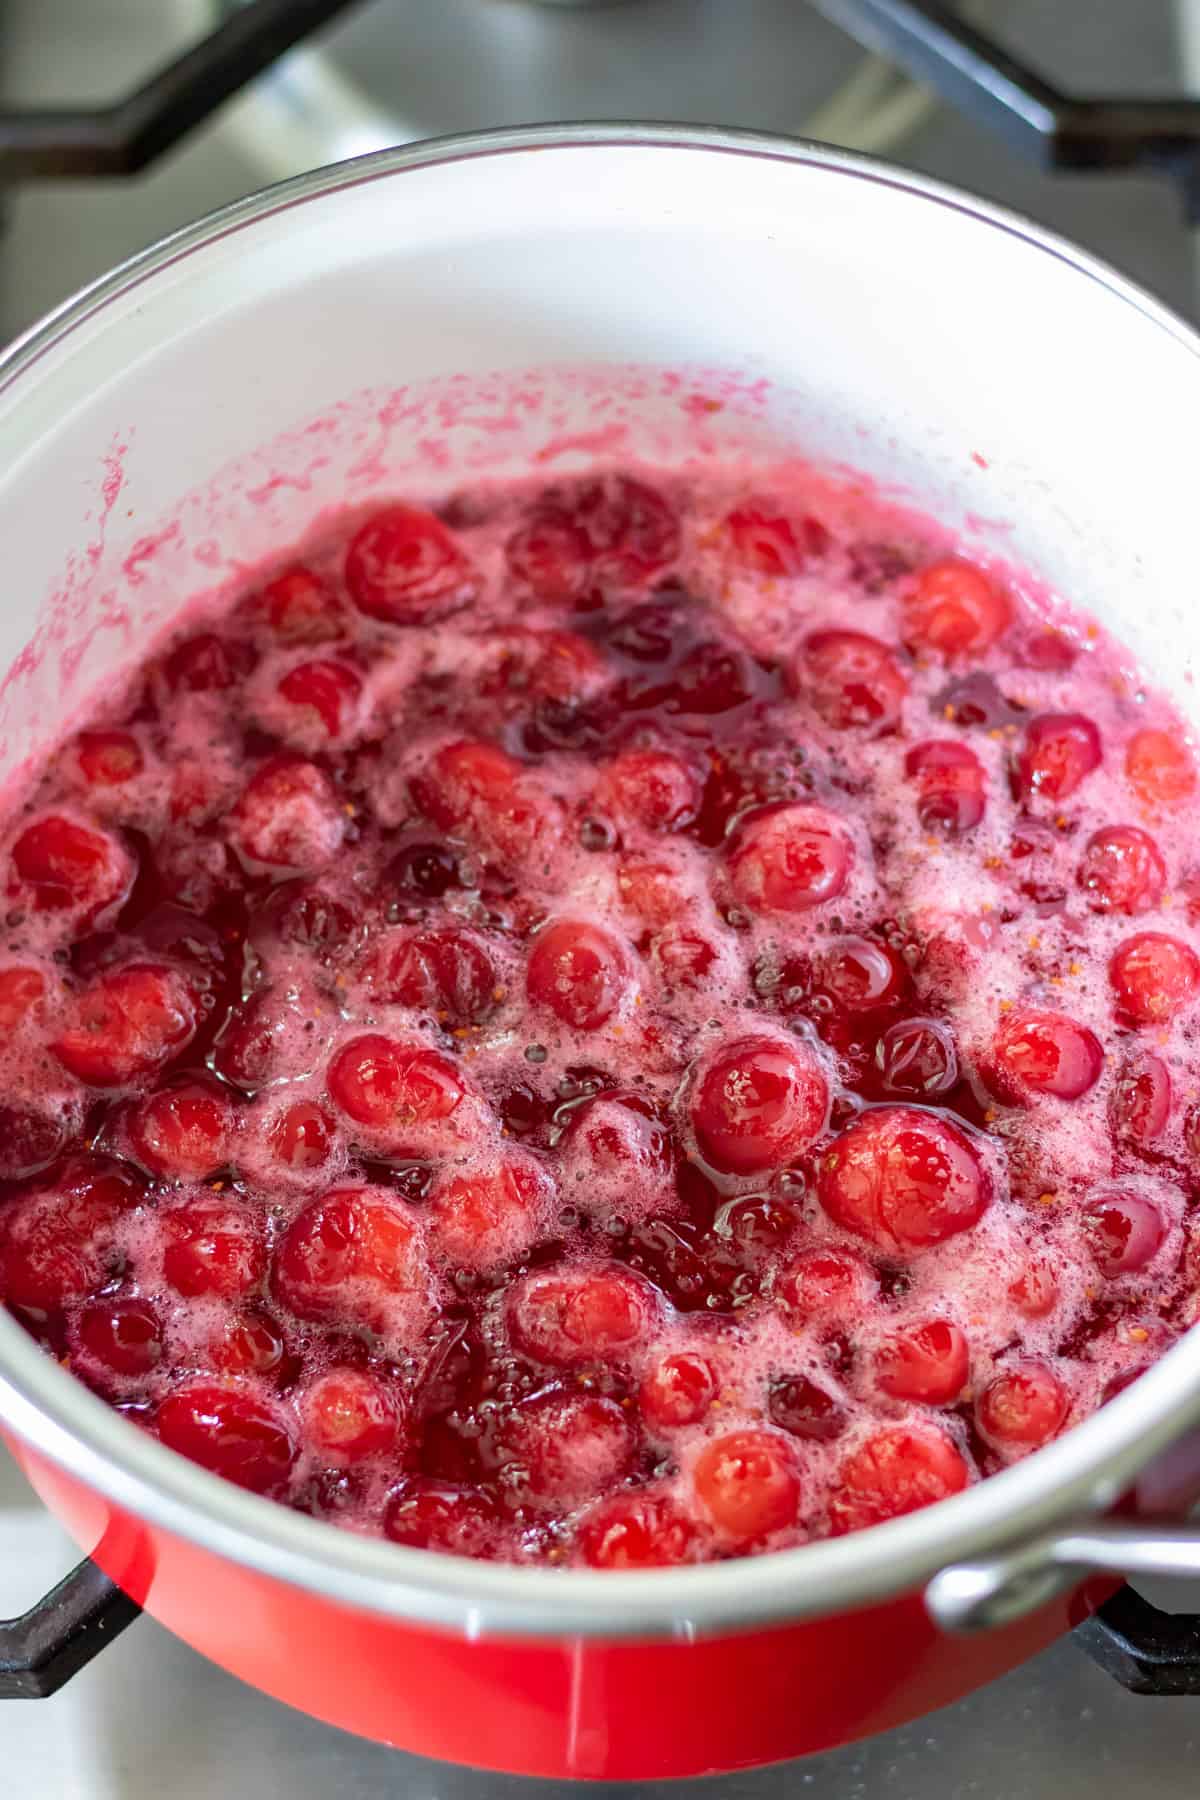 Boiling the cranberry syrup.